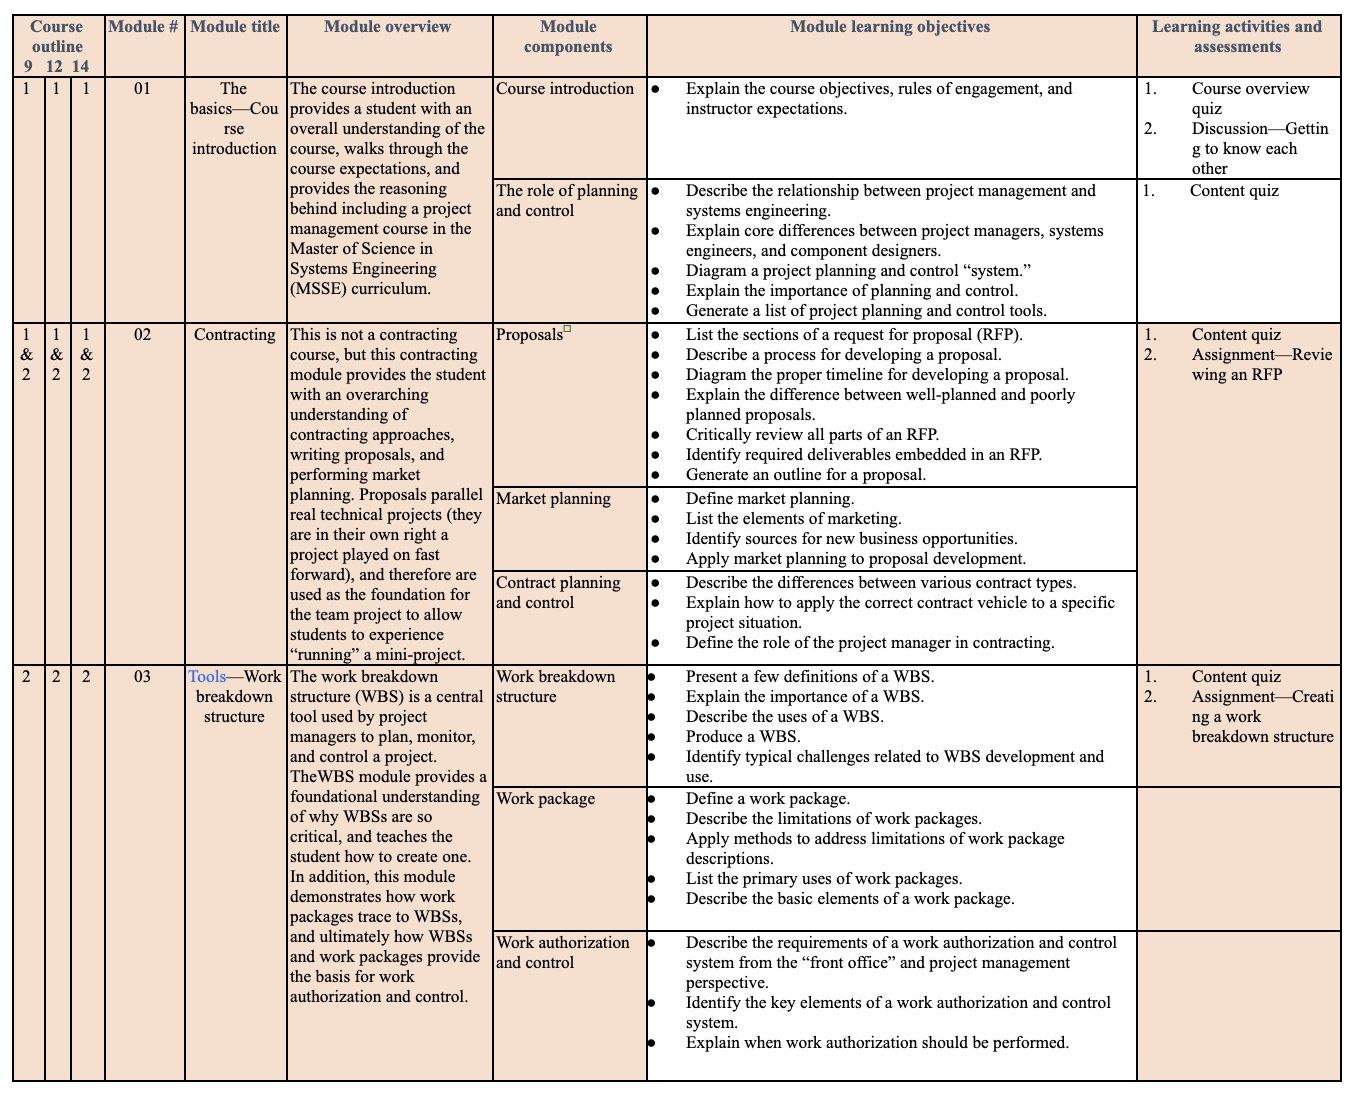 Table of the course design matrix extract